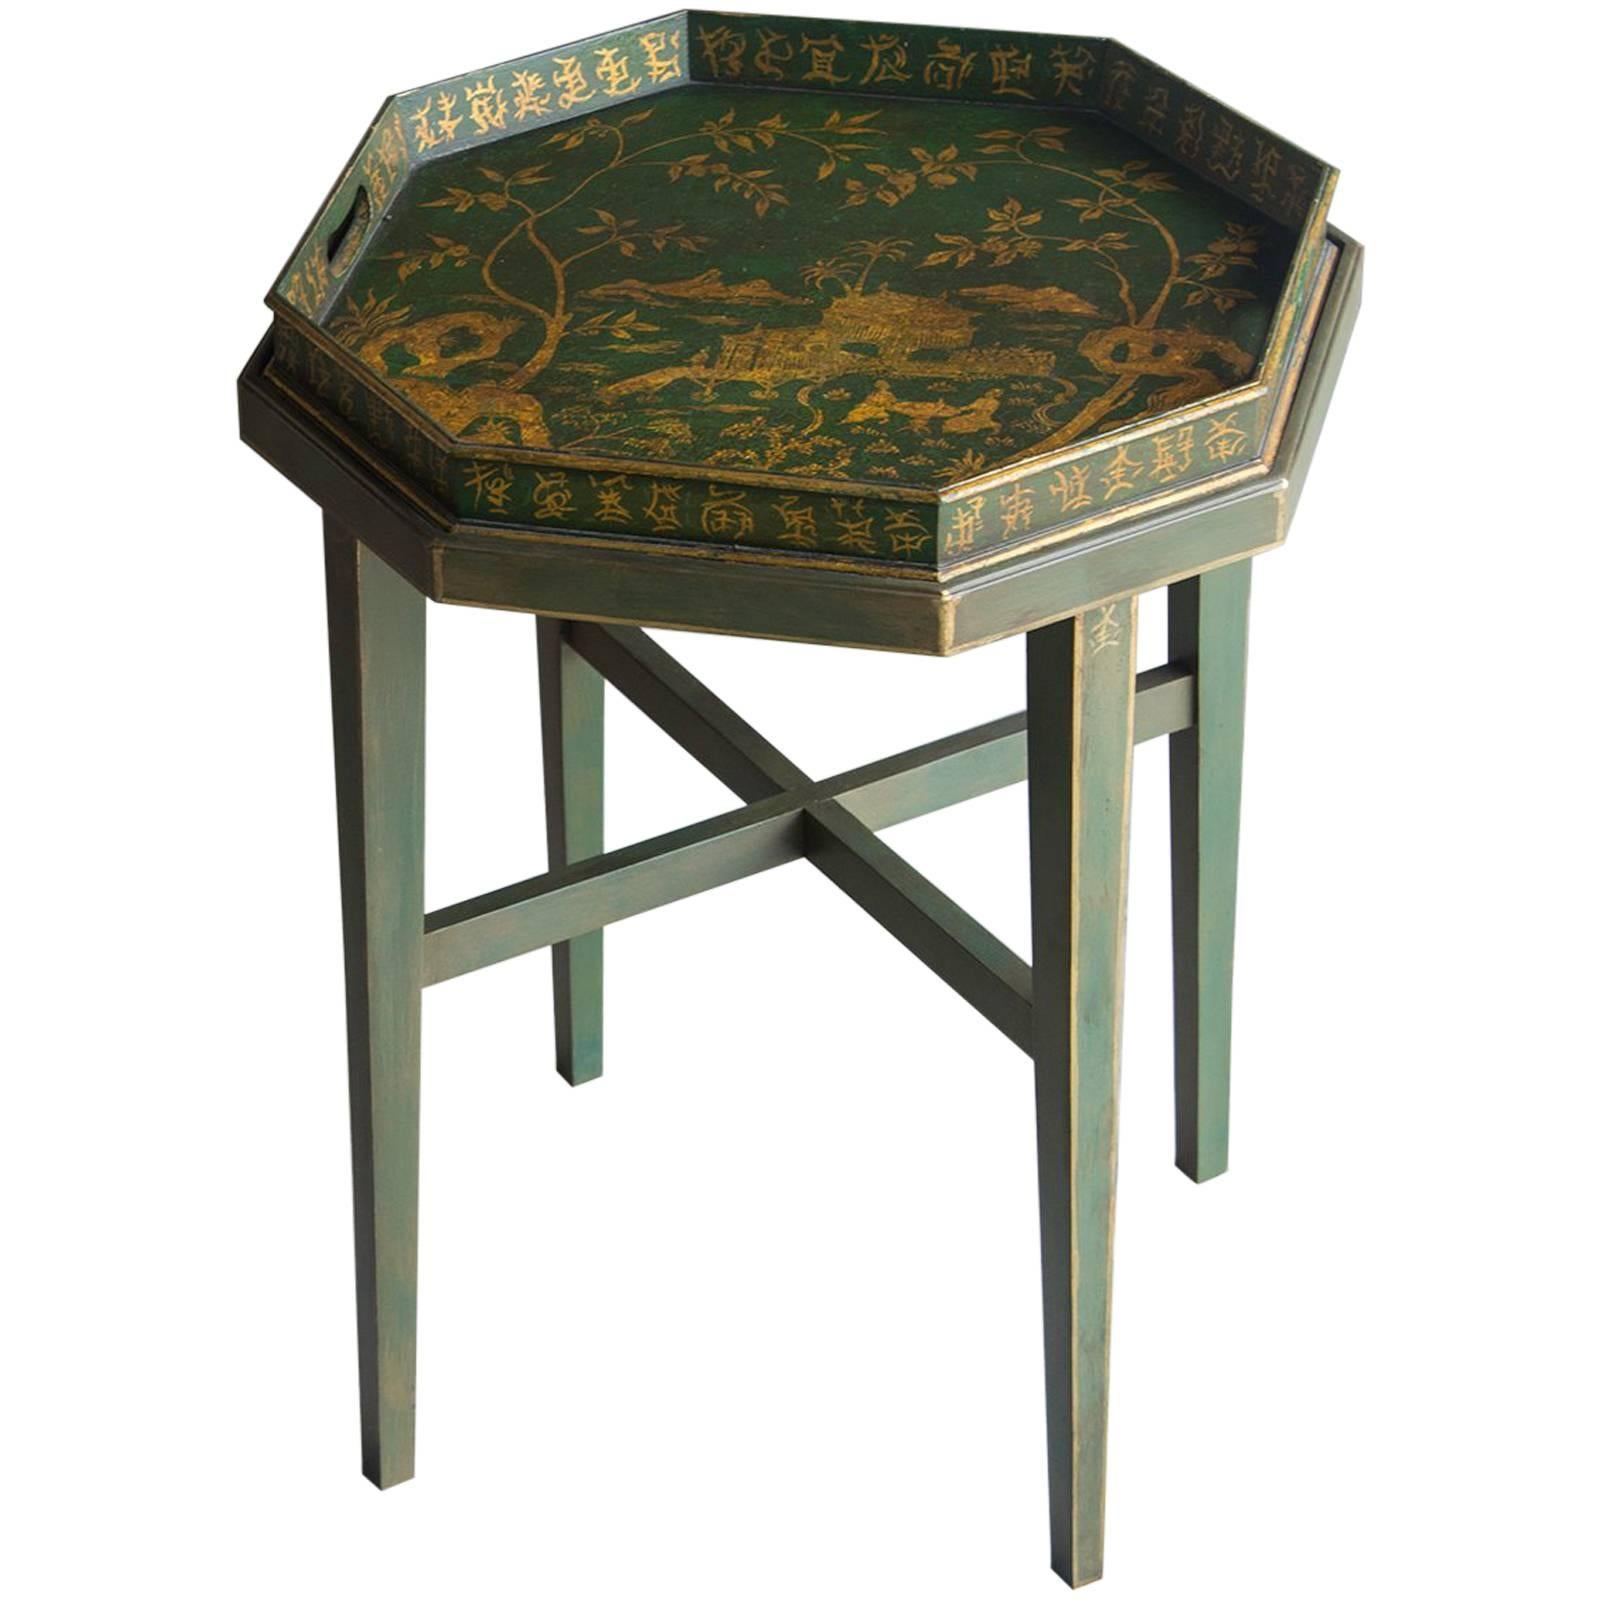 Chinoiserie Painted, Gilded Octagonal Antique English Tray Table, circa 1910